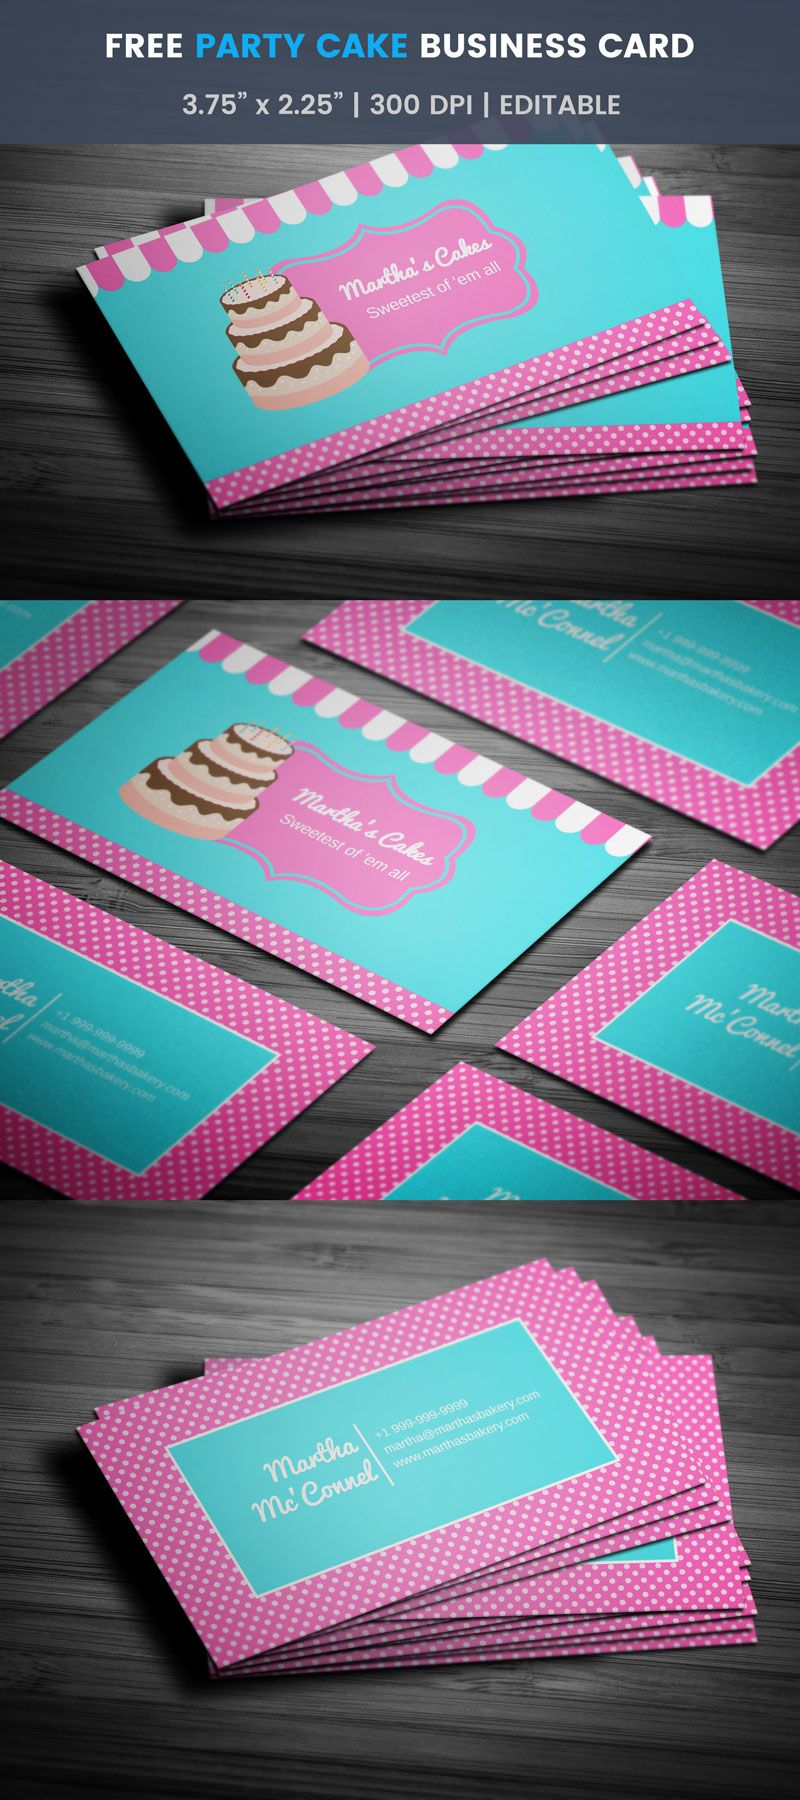 Party Cake Themed Bakery Business Card – Full Preview Inside Cake Business Cards Templates Free